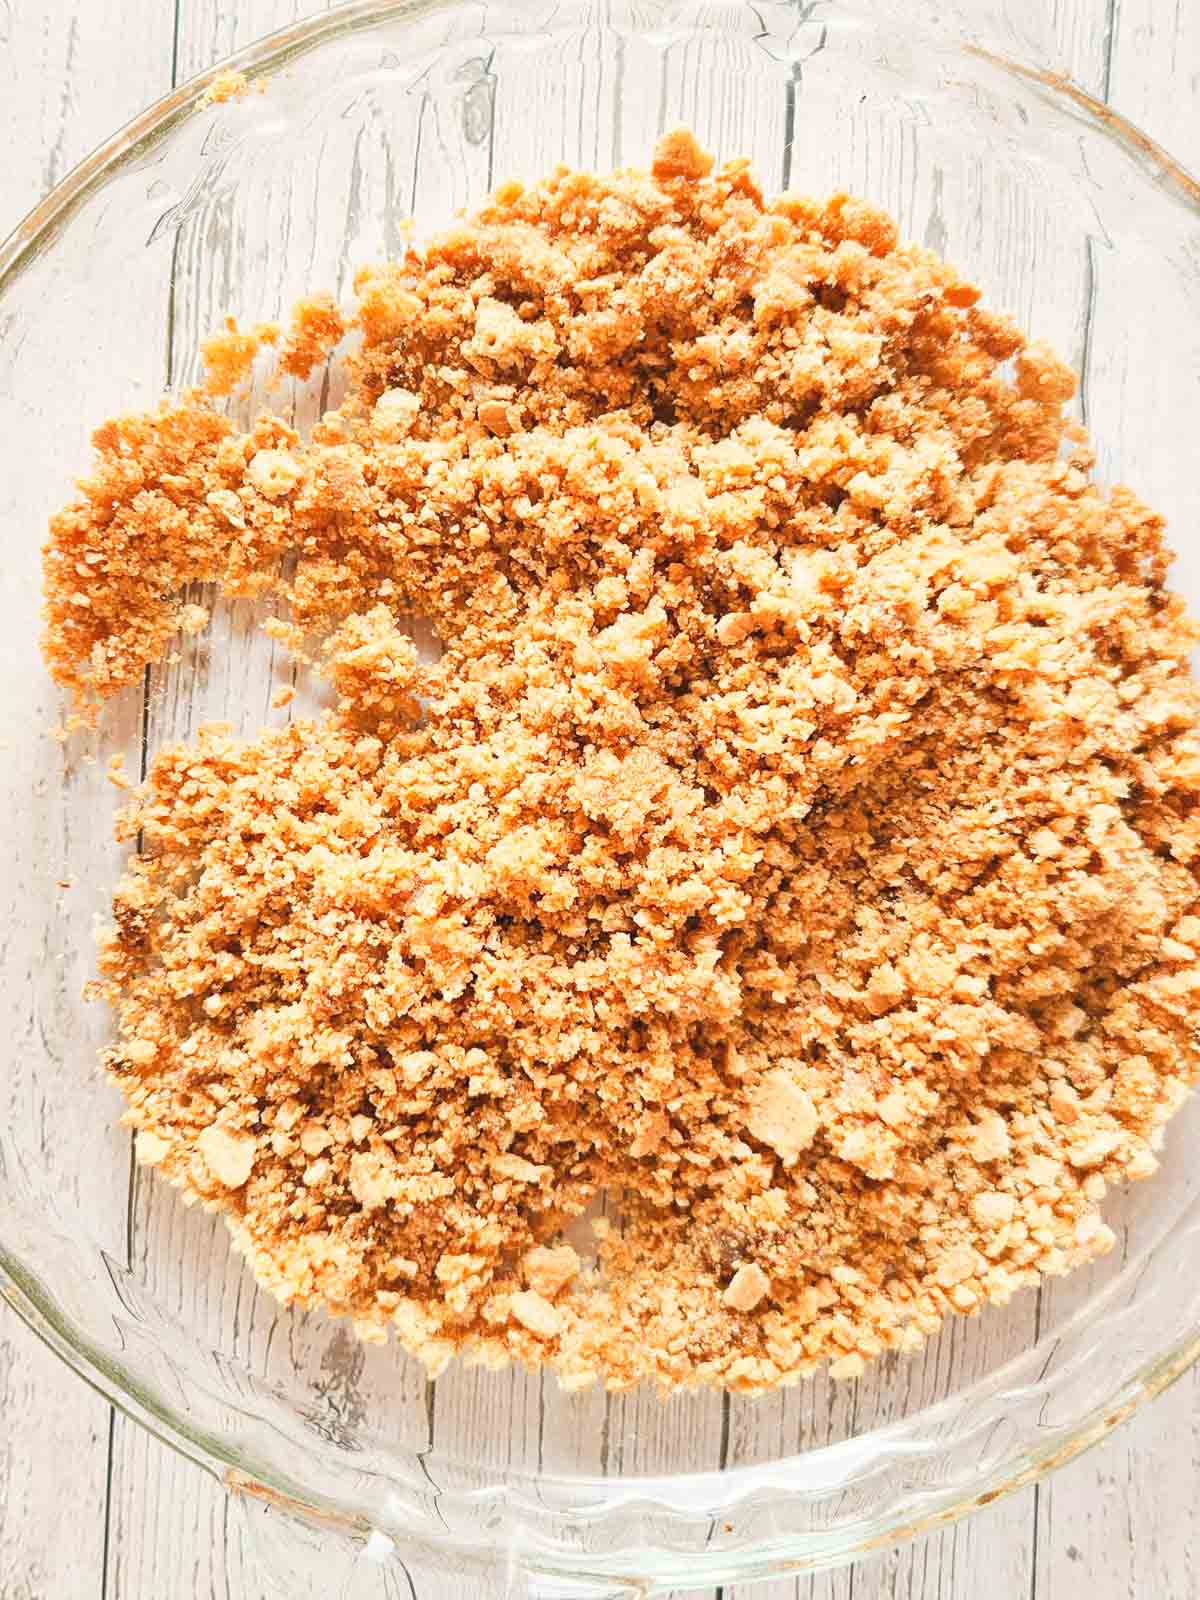 The graham cracker crust no-bake cheesecake ingredients in a bowl after being properly combined.